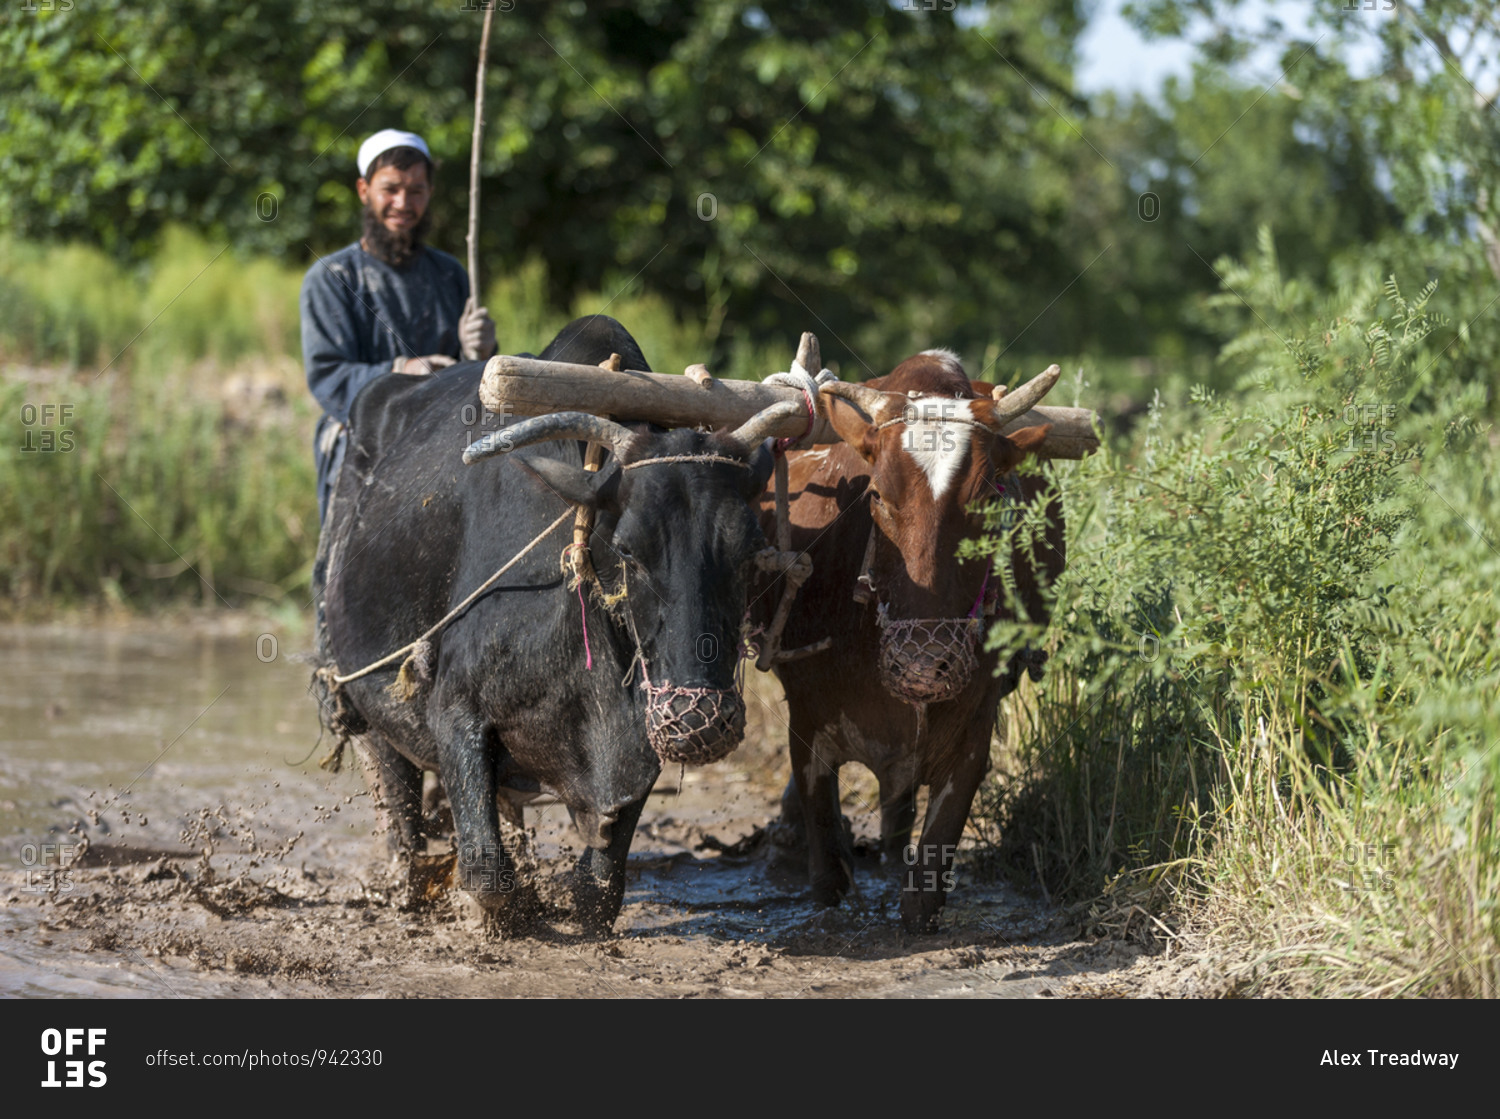 A farmer from Herat province works with cows in his rice paddies